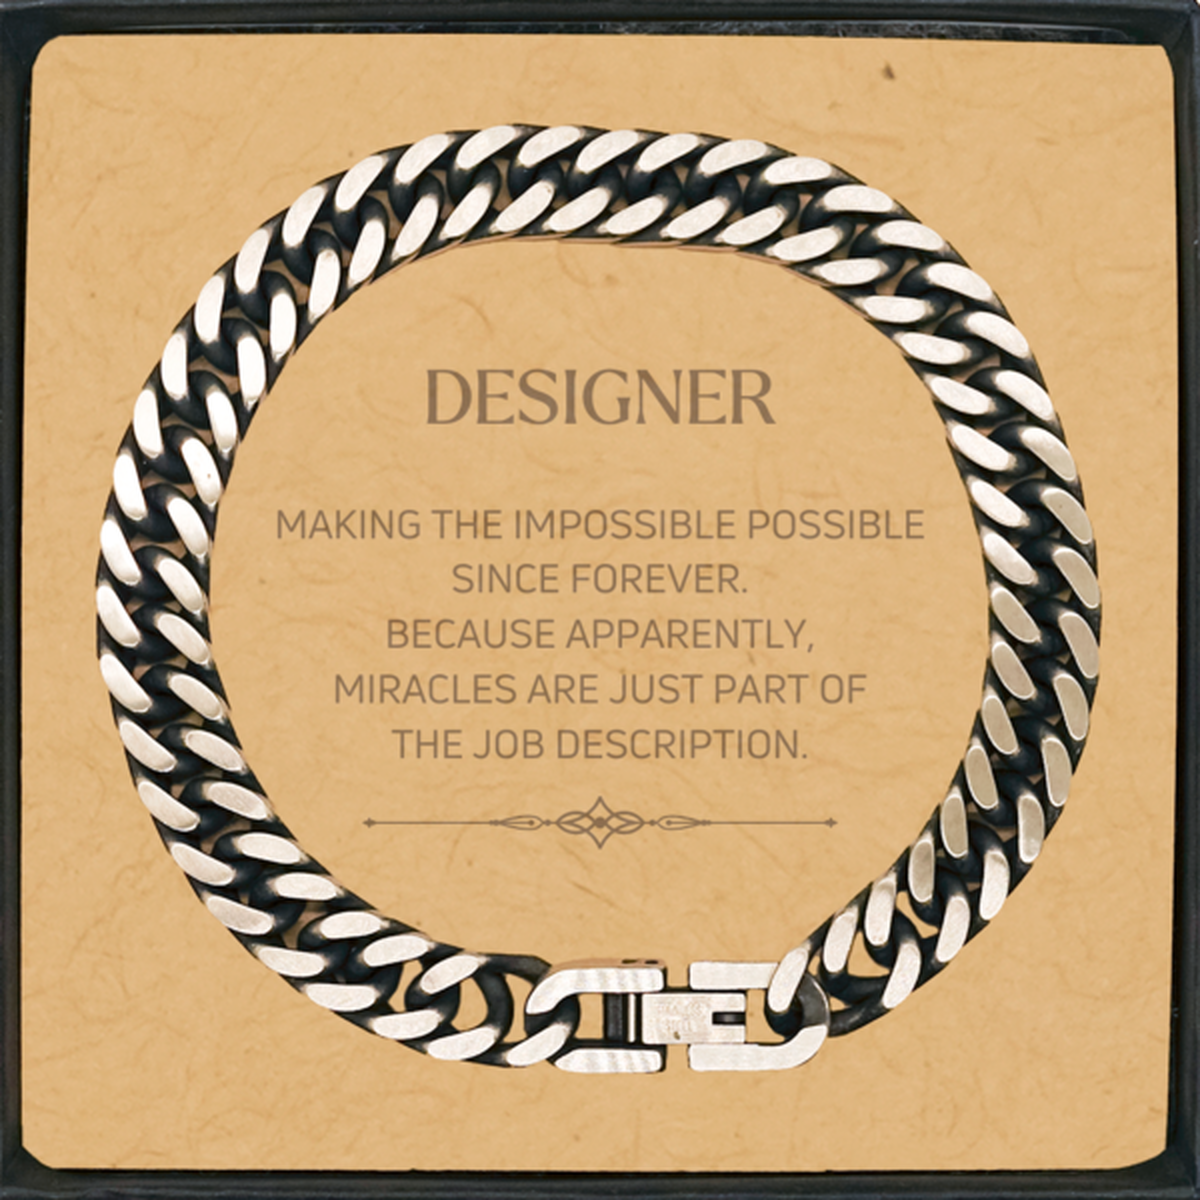 Funny Designer Gifts, Miracles are just part of the job description, Inspirational Birthday Cuban Link Chain Bracelet For Designer, Men, Women, Coworkers, Friends, Boss